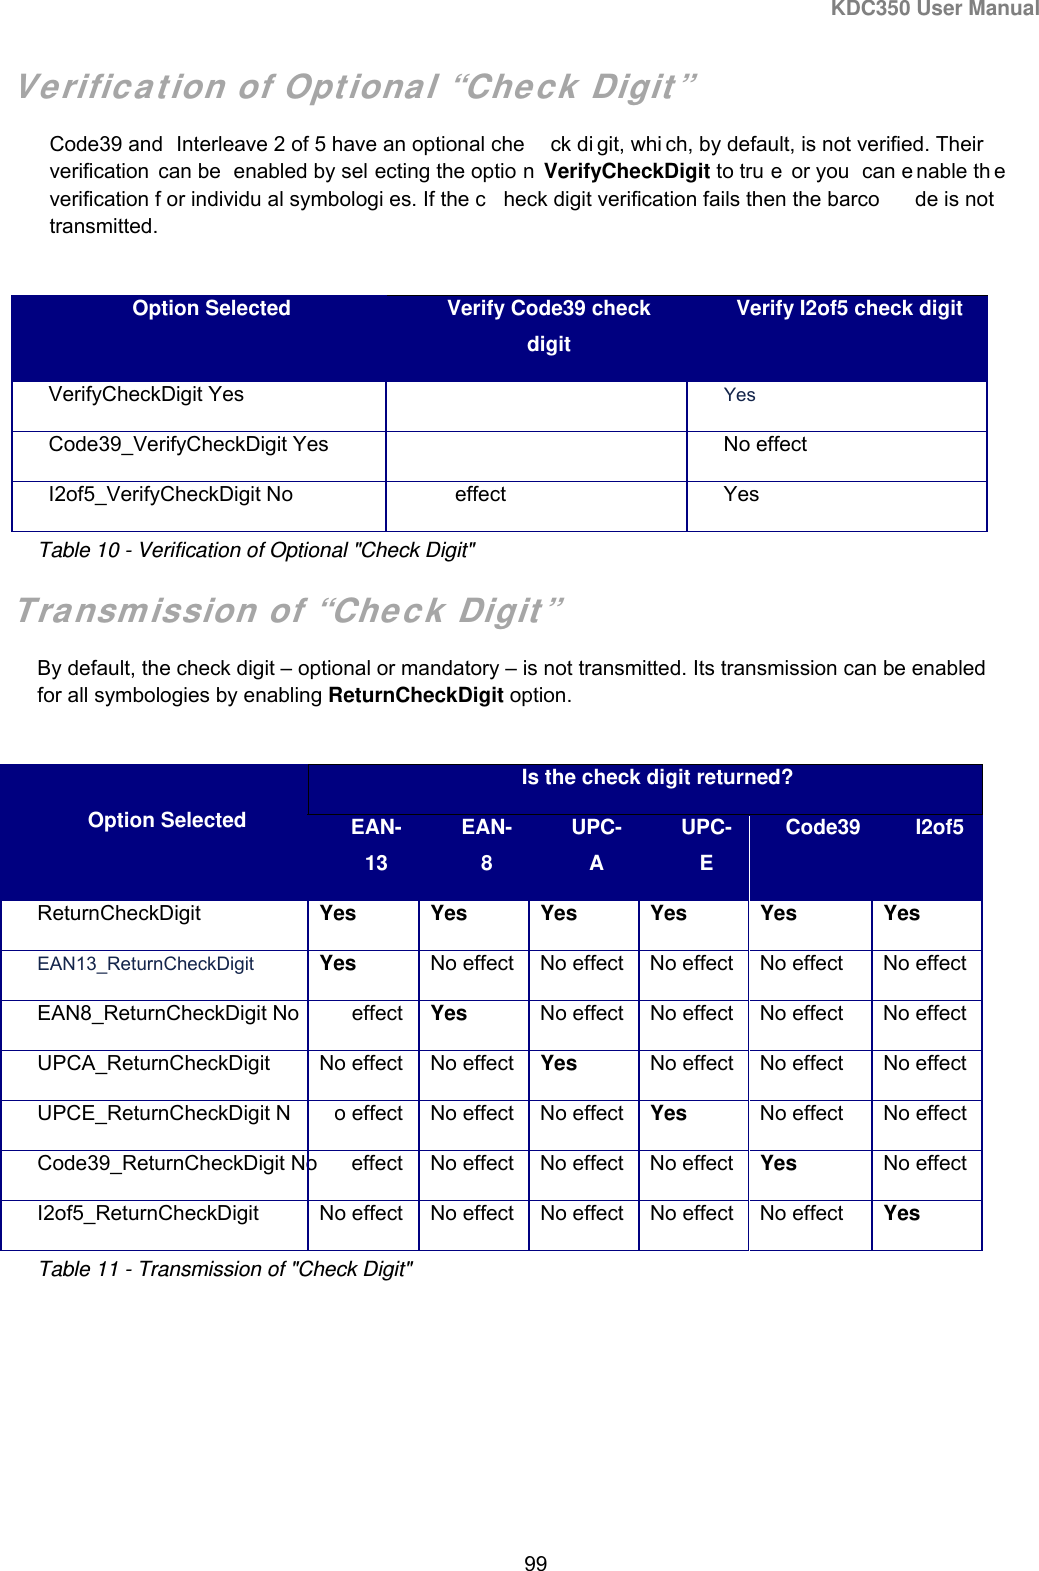 KDC350 User Manual  99  Verification of Optional “Check Digit” Code39 and  Interleave 2 of 5 have an optional che ck di git, whi ch, by default, is not verified. Their verification can be  enabled by sel ecting the optio n VerifyCheckDigit to tru e or you  can e nable th e verification f or individu al symbologi es. If the c heck digit verification fails then the barco de is not  transmitted.   Option Selected  Verify Code39 check digit Verify I2of5 check digit VerifyCheckDigit Yes  Yes Code39_VerifyCheckDigit Yes  No effect I2of5_VerifyCheckDigit No effect  Yes Table 10 - Verification of Optional &quot;Check Digit&quot; Transmission of “Check Digit” By default, the check digit – optional or mandatory – is not transmitted. Its transmission can be enabled for all symbologies by enabling ReturnCheckDigit option.   Option Selected Is the check digit returned? EAN-13 EAN-8 UPC-A UPC-E Code39  I2of5ReturnCheckDigit  Yes Yes Yes Yes Yes  Yes EAN13_ReturnCheckDigit  Yes  No effect No effect No effect No effect  No effectEAN8_ReturnCheckDigit No effect Yes  No effect No effect No effect  No effectUPCA_ReturnCheckDigit  No effect No effect Yes No effect No effect  No effectUPCE_ReturnCheckDigit N o effect No effect No effect Yes No effect  No effectCode39_ReturnCheckDigit No effect No effect No effect No effect Yes No effectI2of5_ReturnCheckDigit  No effect No effect No effect No effect No effect  Yes Table 11 - Transmission of &quot;Check Digit&quot; 